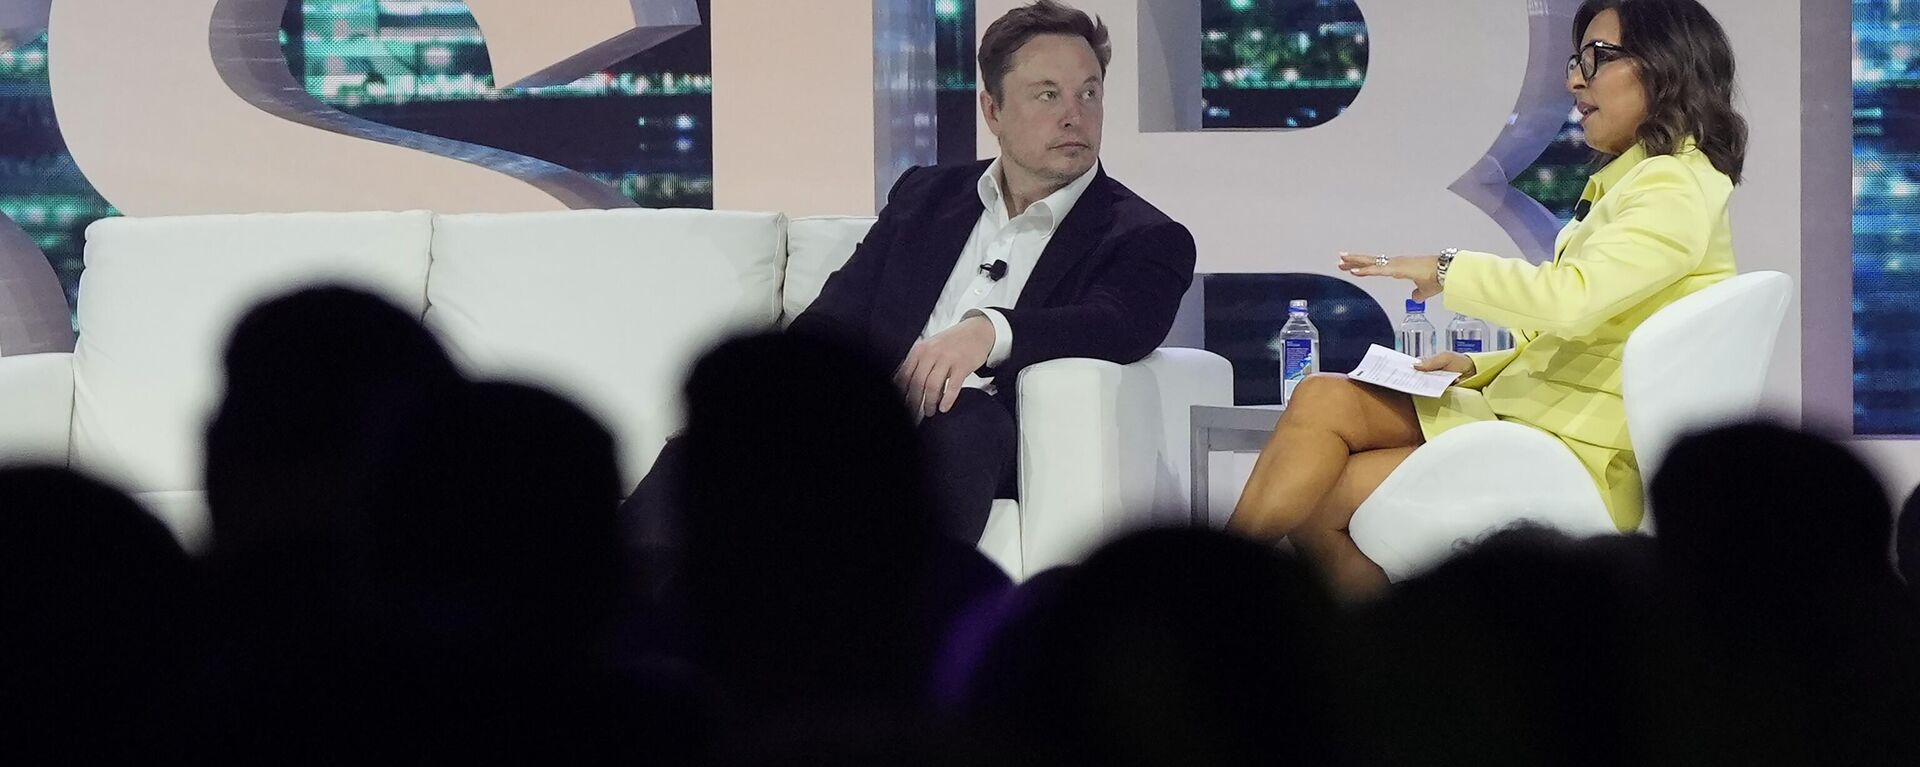 Twitter CEO Elon Musk, center, speaks with Linda Yaccarino, chairman of global advertising and partnerships for NBC, at the POSSIBLE marketing conference, Tuesday, April 18, 2023, in Miami Beach, Fla. - Sputnik India, 1920, 12.05.2023